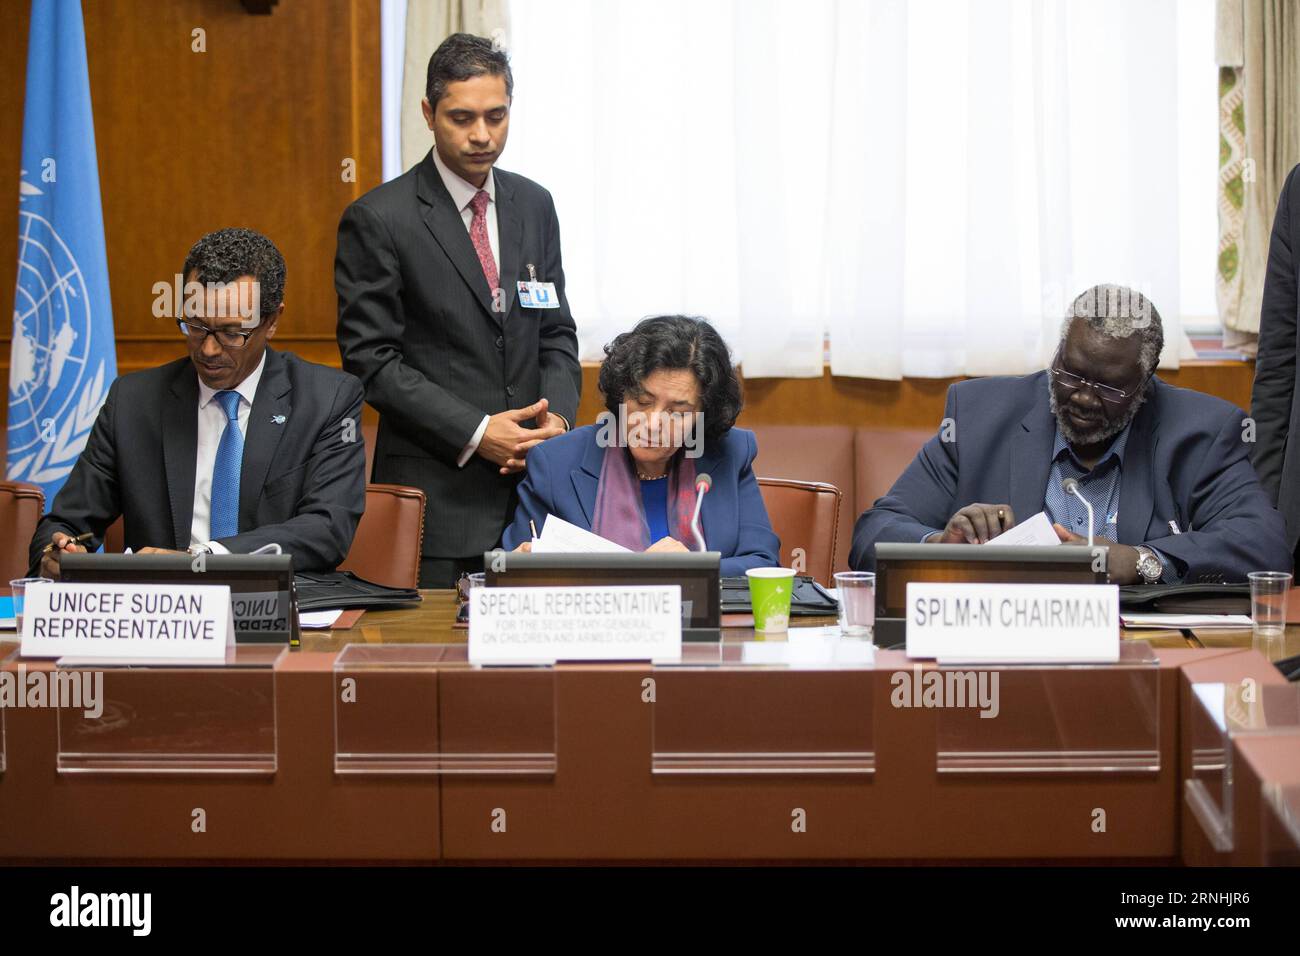 (161123) -- GENEVA, Nov. 23, 2016 -- Malik Agar (R), chairman of the rebel Sudan People s Liberation Movement (SPLM)/northern sector, the Special Representative of the UN Secretary-General (SRSG) for Children and Armed Conflict Leila Zerrougui (C) and UNICEF Sudan Representative Abdullah A. Fadil sign an Action Plan to end and prevent the recruitment and use of children in conflict in Geneva, Switzerland, Nov. 23, 2016. ) SWITZERLAND-GENEVA-UN-SUDAN-SPLM/NORTHERN SECTOR-CHILDREN-CONFLICT-ACTION PLAN XuxJinquan PUBLICATIONxNOTxINxCHN   Geneva Nov 23 2016 Malik Agar r Chairman of The Rebel Sudan Stock Photo